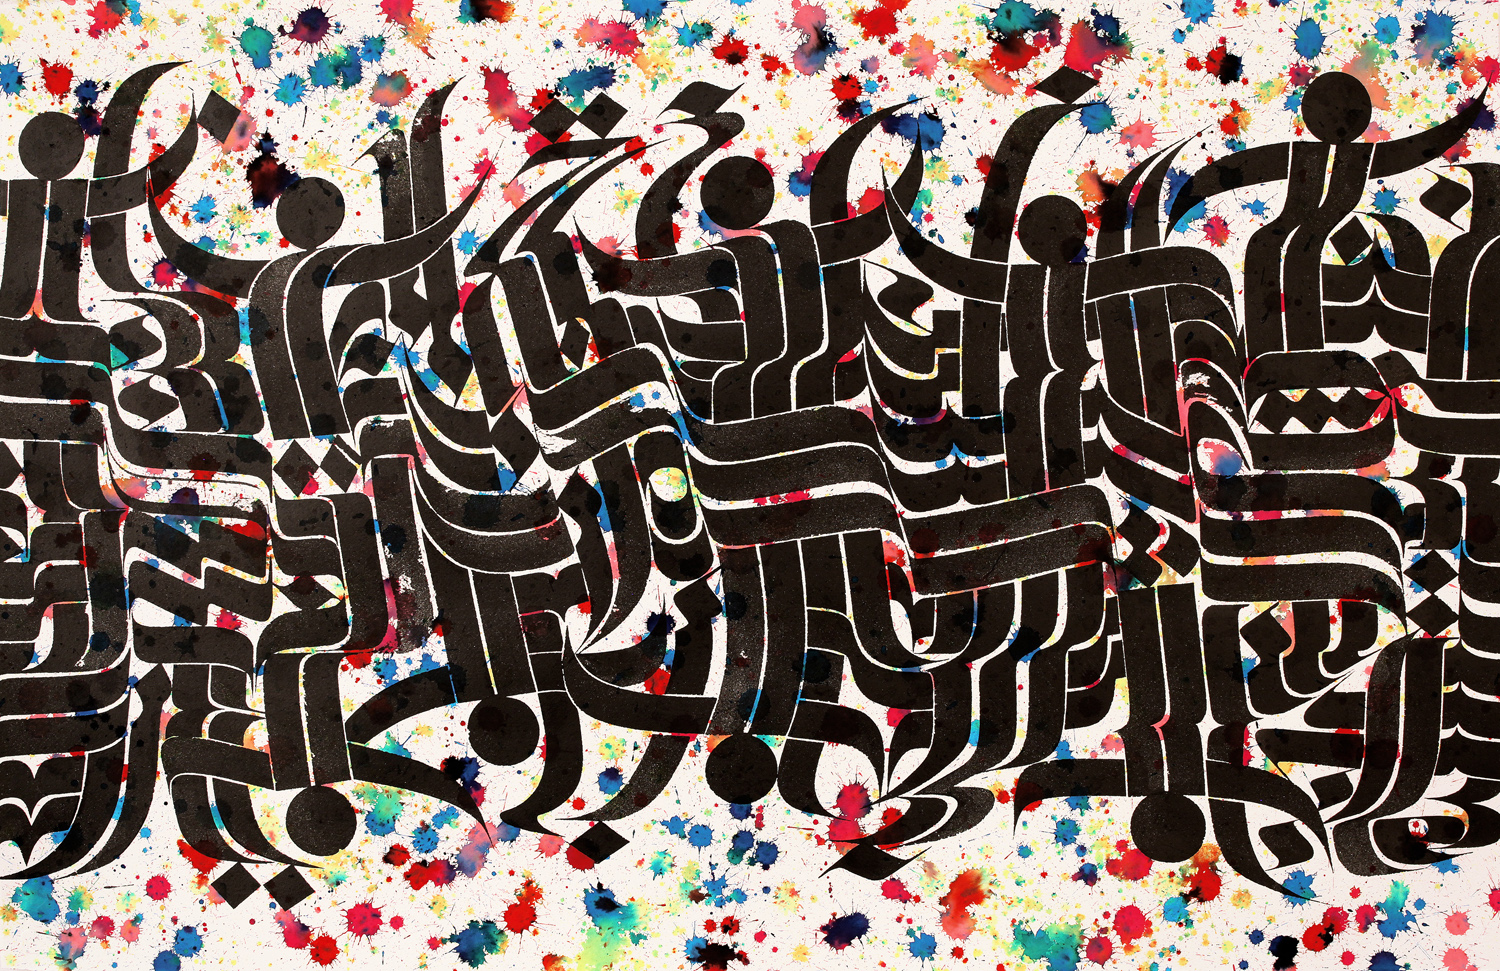  Showtime I, 2012 ink on handmade paper 27 x 40 inch&nbsp; 